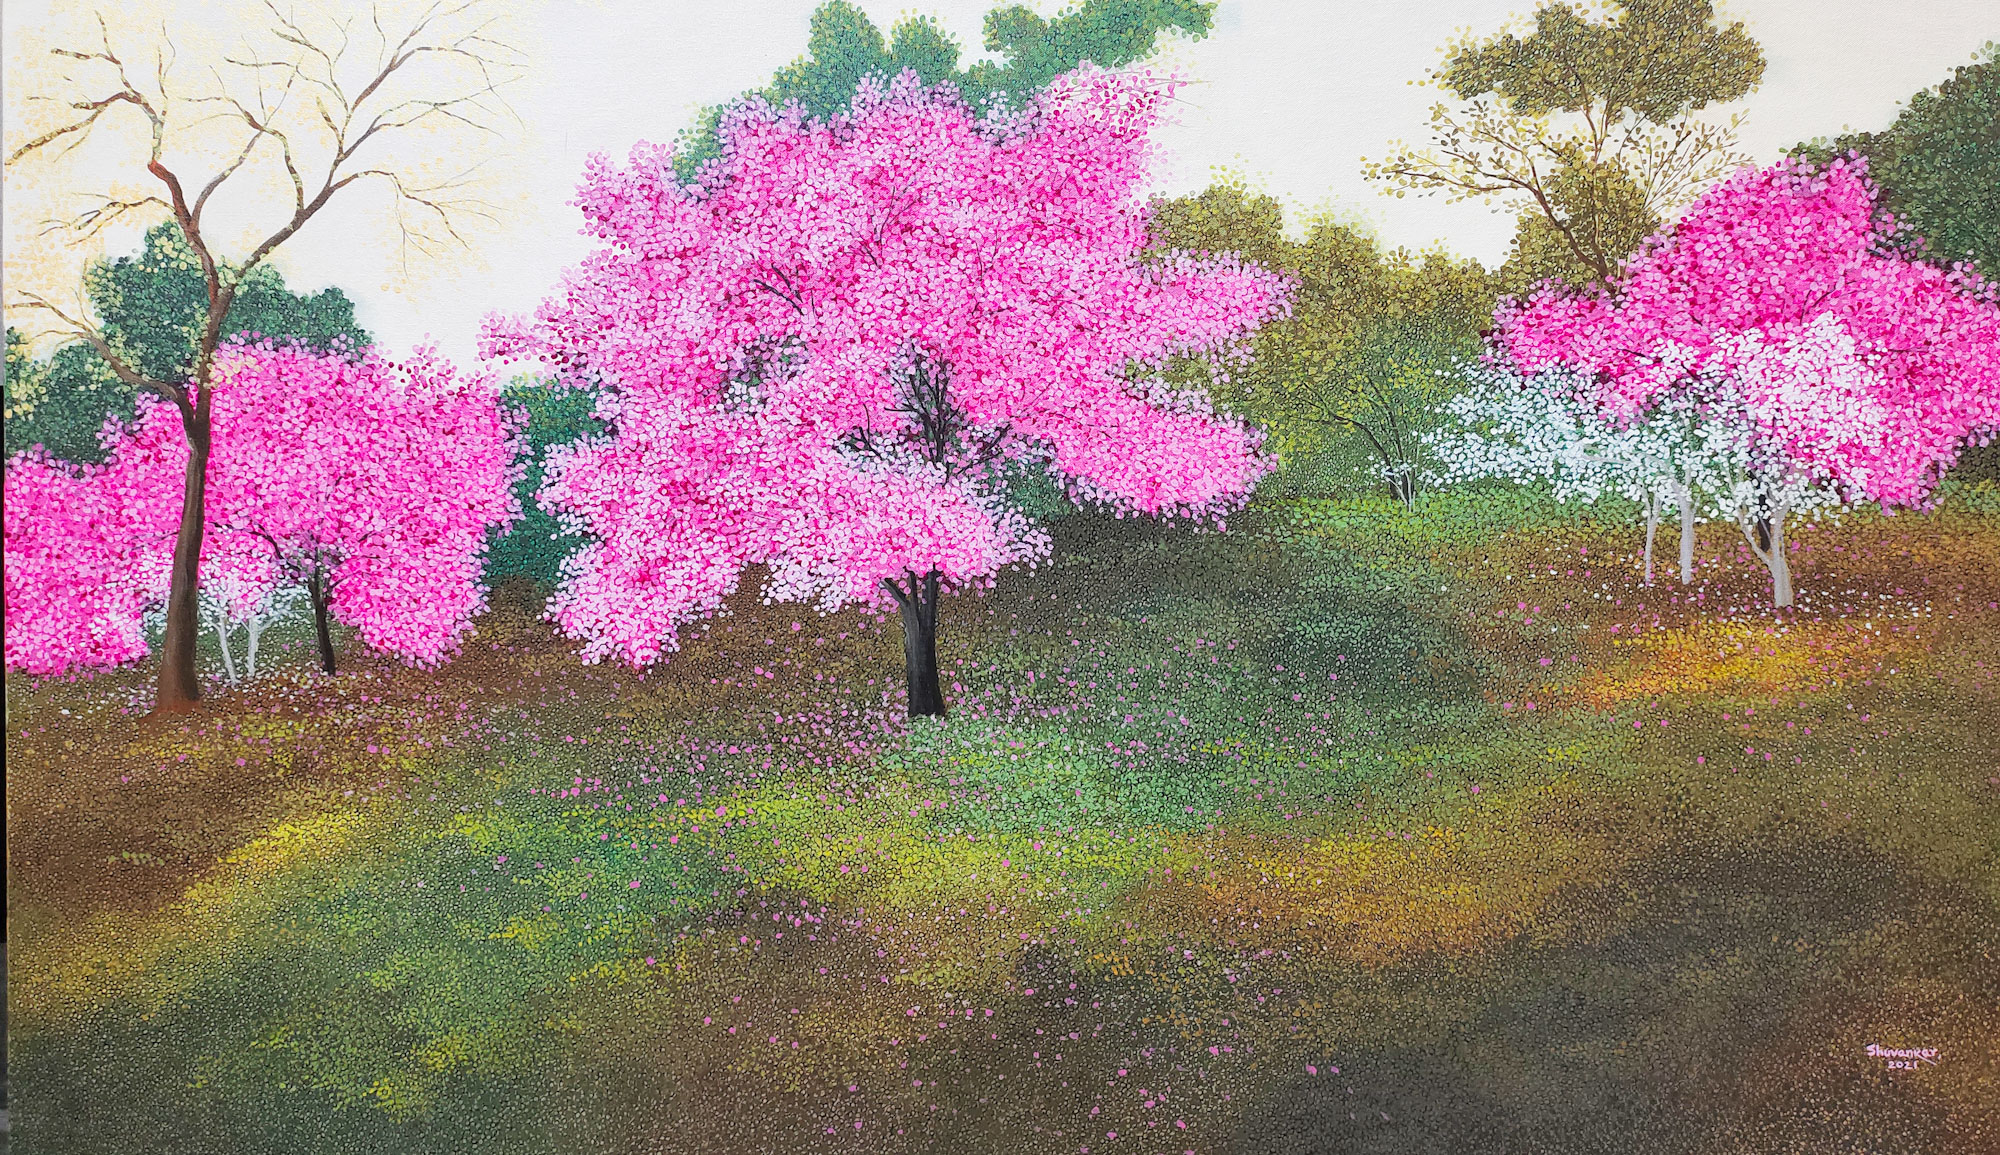 The Pink Blossom